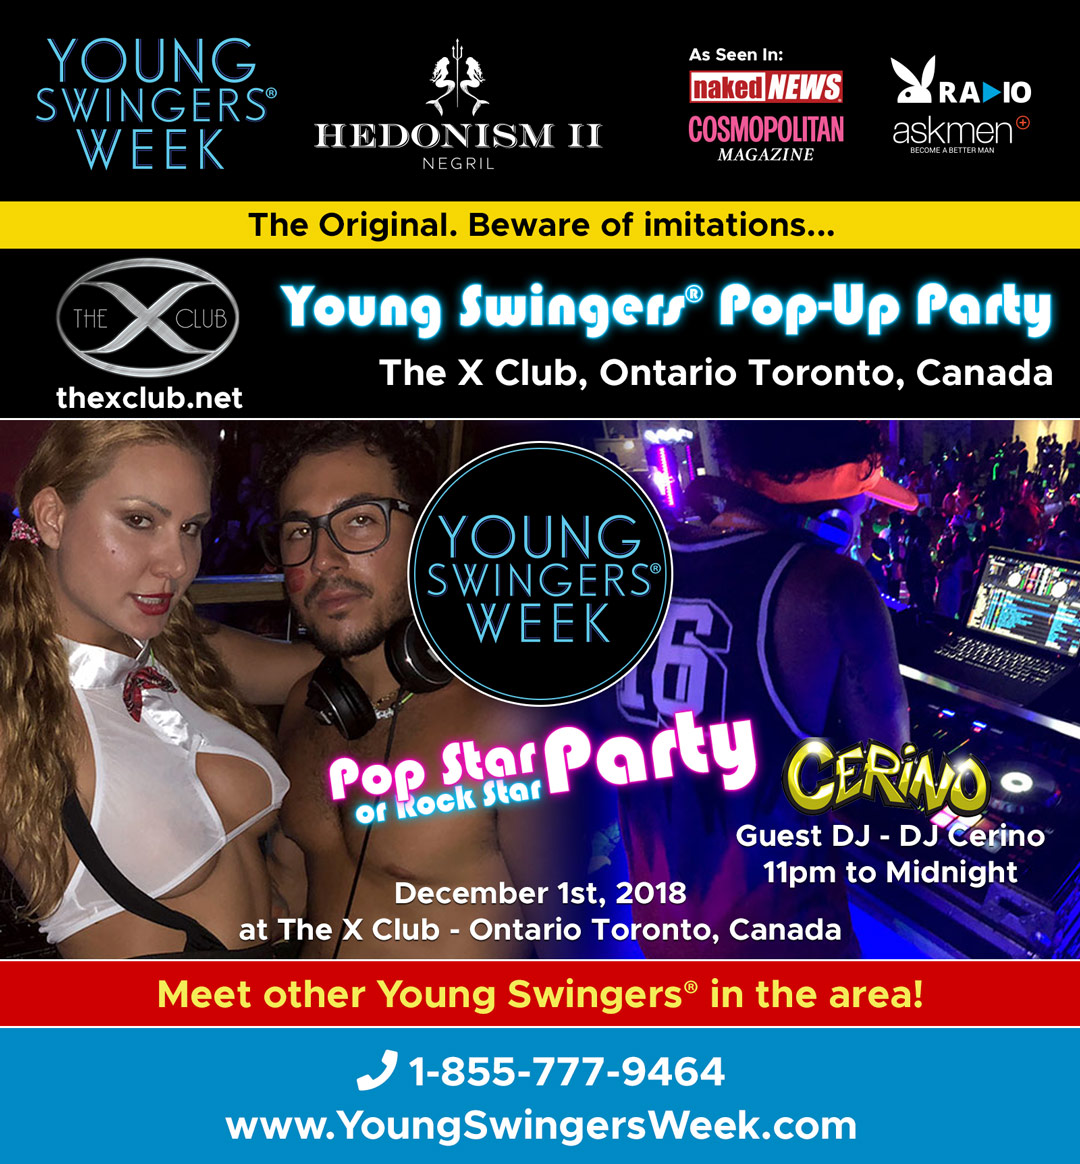 Young Swingers® Pop-Up Party at The X Club, Canada Pop Star Night photo